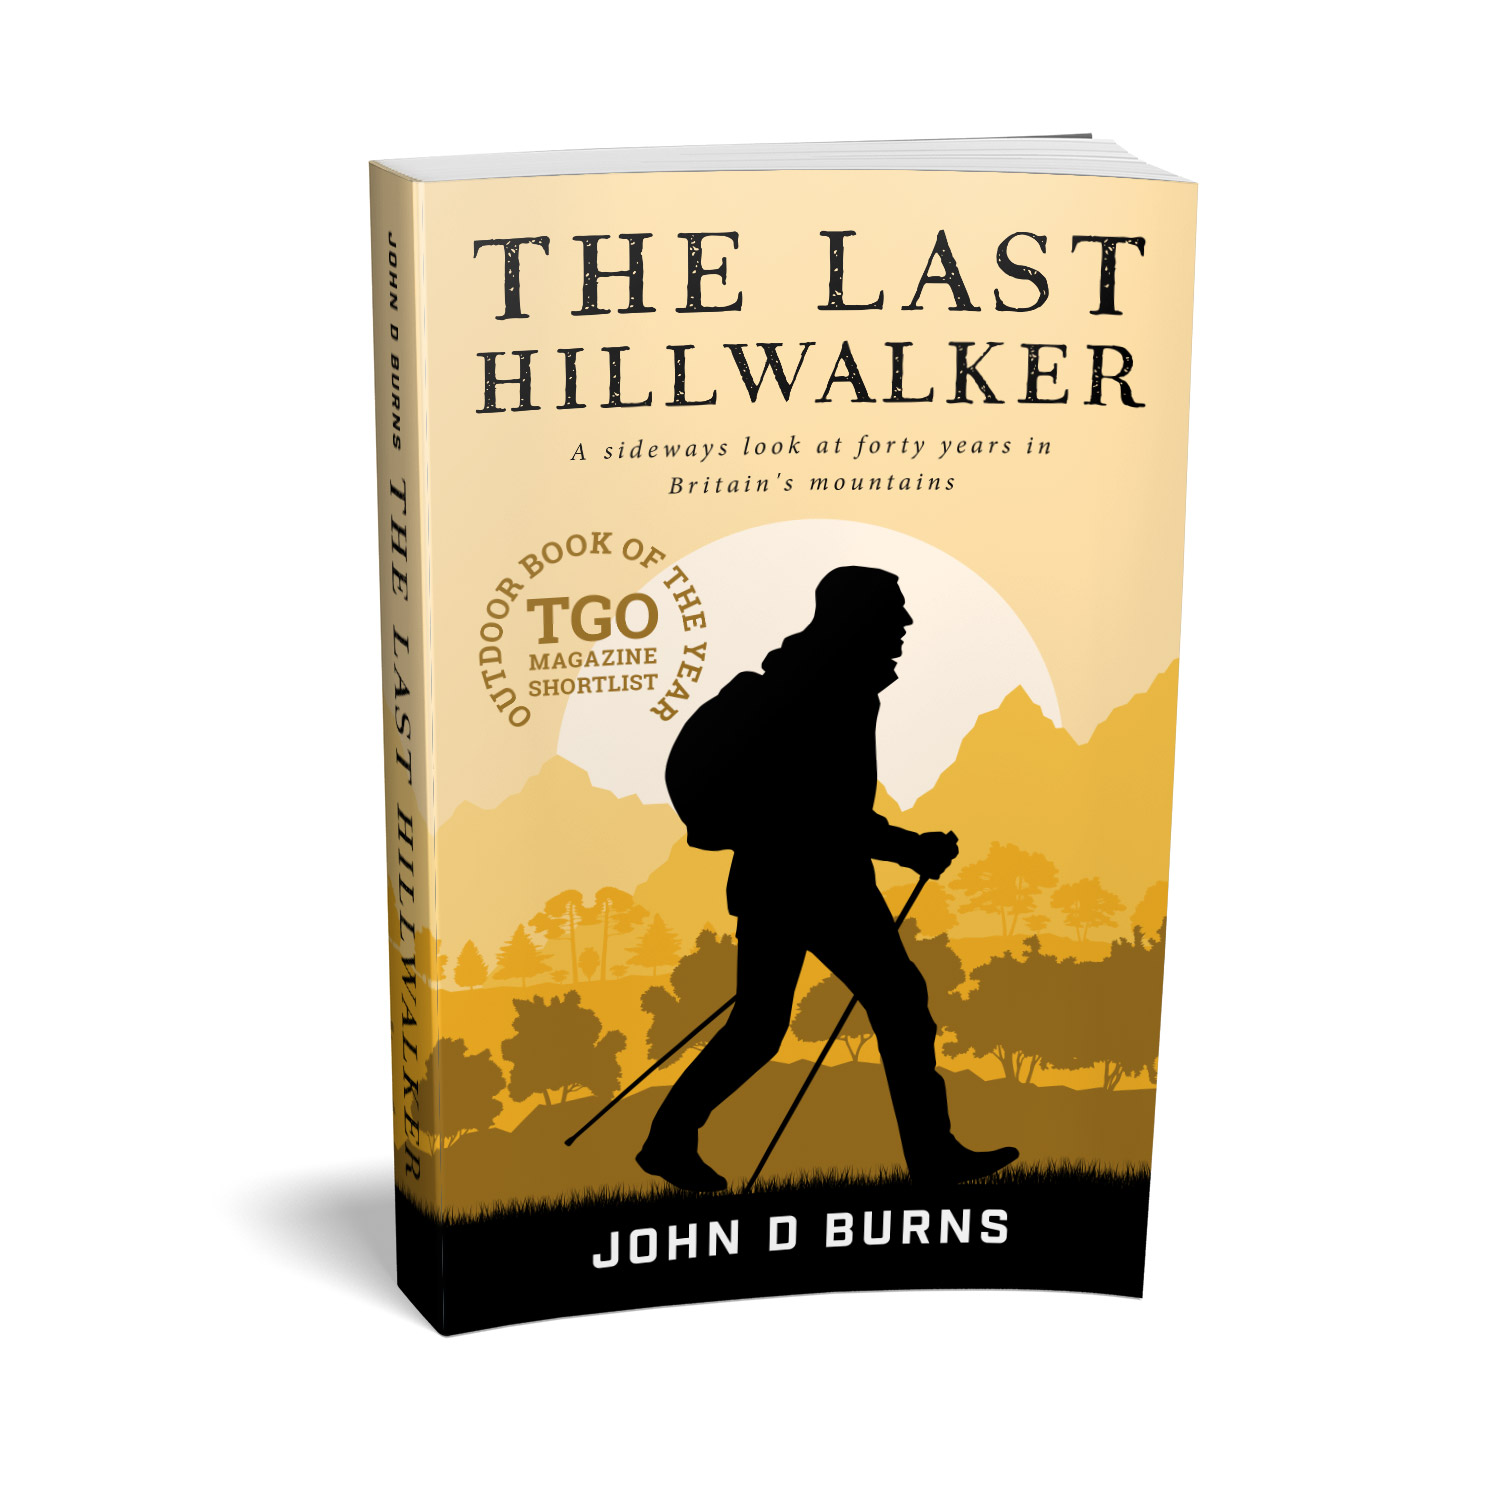 'The Last Hillwalker' is an excellent, funny and moving memoir about walking Britain's hills and mountains, by author John D Burns. The book cover and interior were designed by Mark Thomas, of coverness.com. To find out more about my book design services, please visit www.coverness.com.